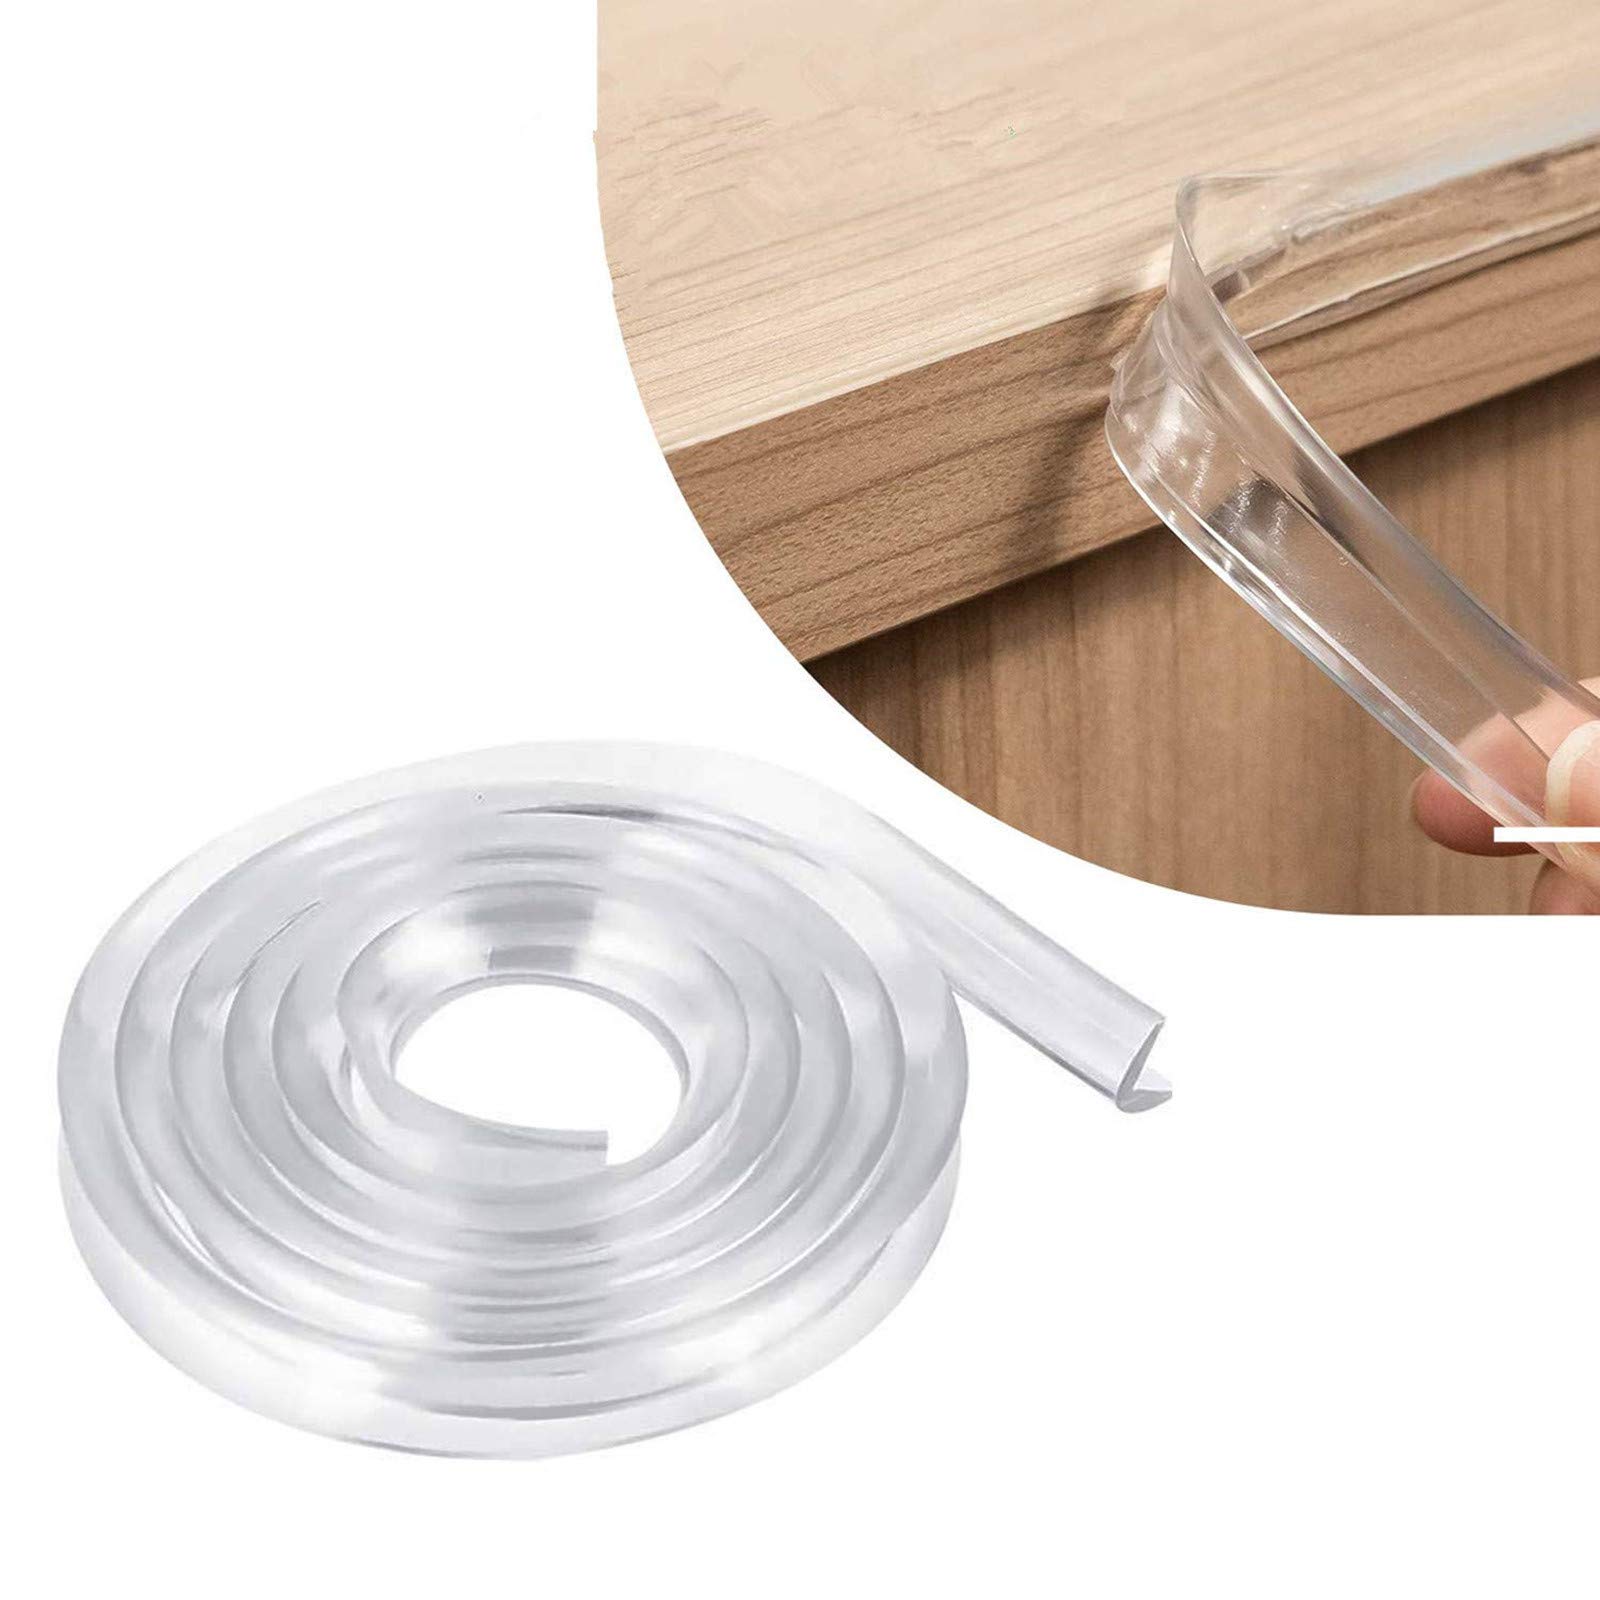 Corner Protectors Strip Clear Transparent, E-PRONSE 6M/20FT Furniture Table  Edge Protectors Soft Silicone Bumper Strip with 14M Strong Adhesive Tape  for for Cabinets, Tables, Drawers 6m 10mm